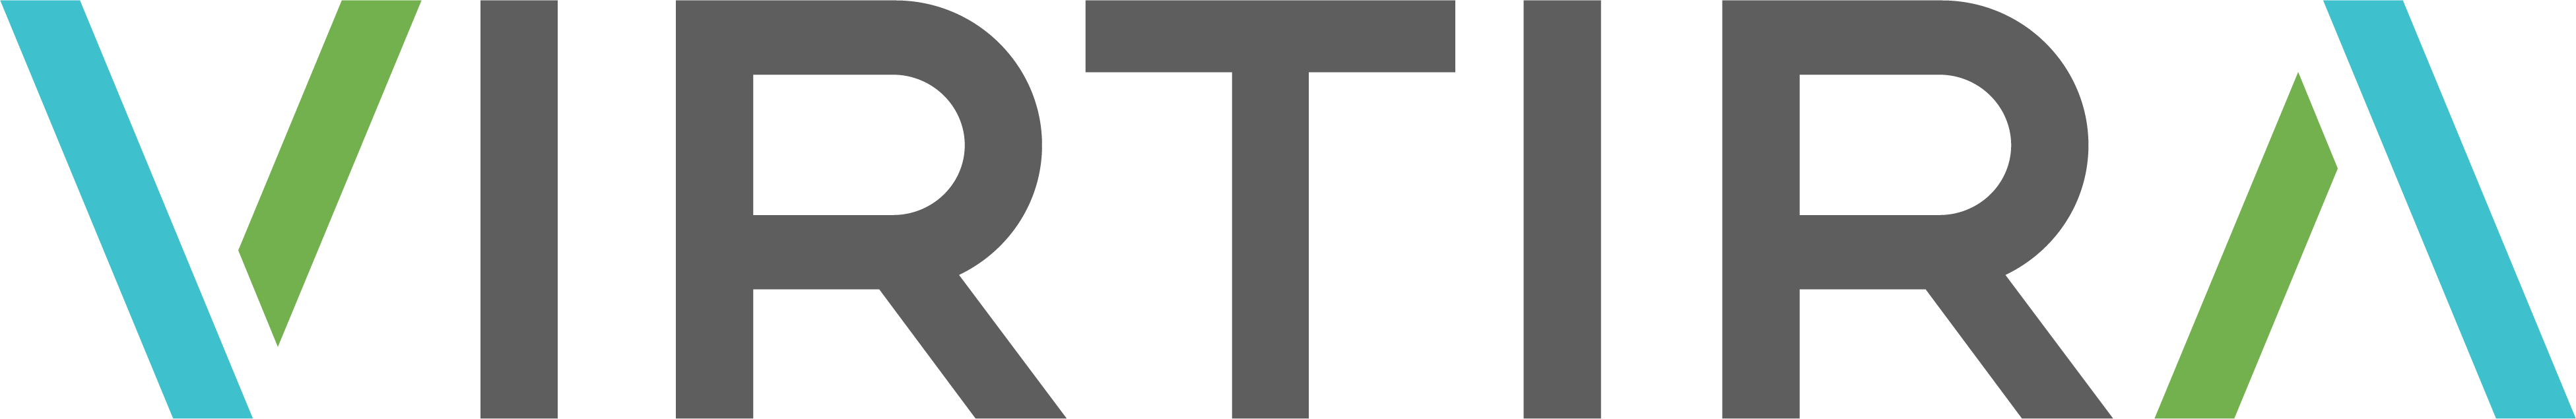 Primary Logo Large - Grey.png